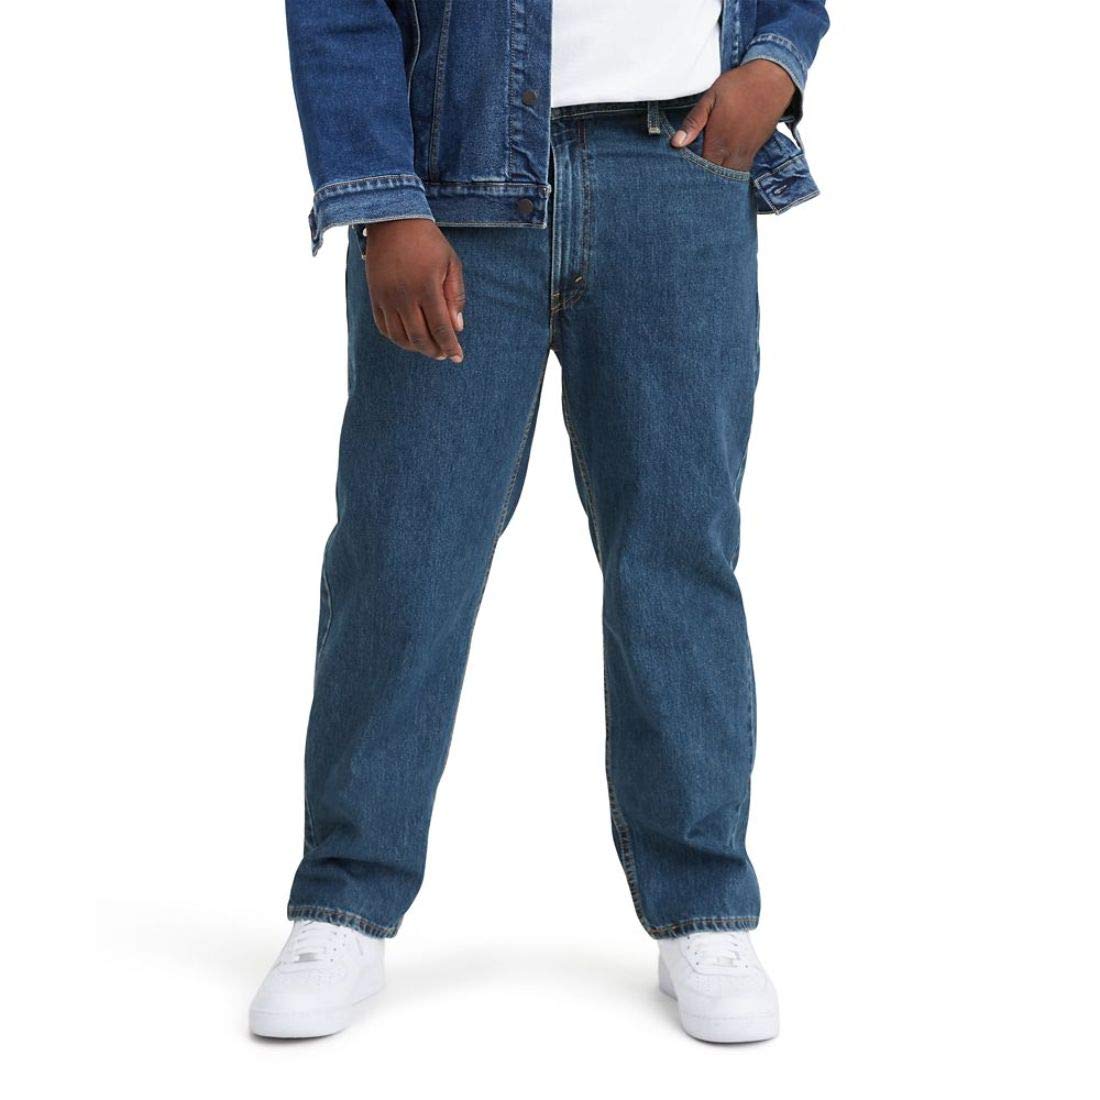 Levi's Men's 550 Relaxed Fit Jeans (Also Available in Big & Tall), Dark Stonewash, 44W x 32L Big Tall